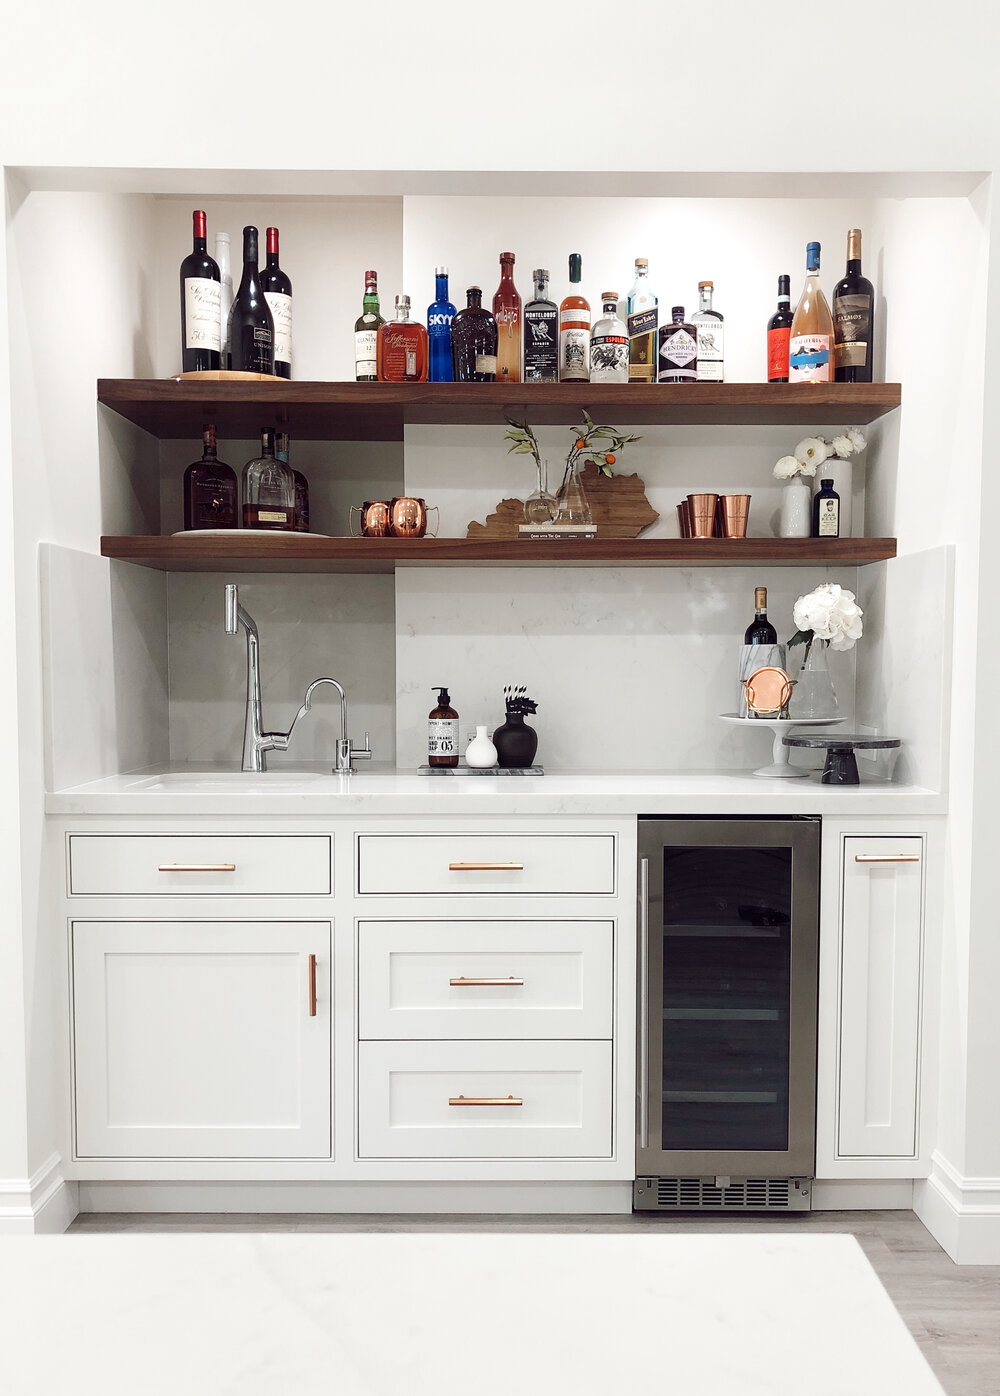 Top 10 decorating home bar ideas for a stylish and functional bar